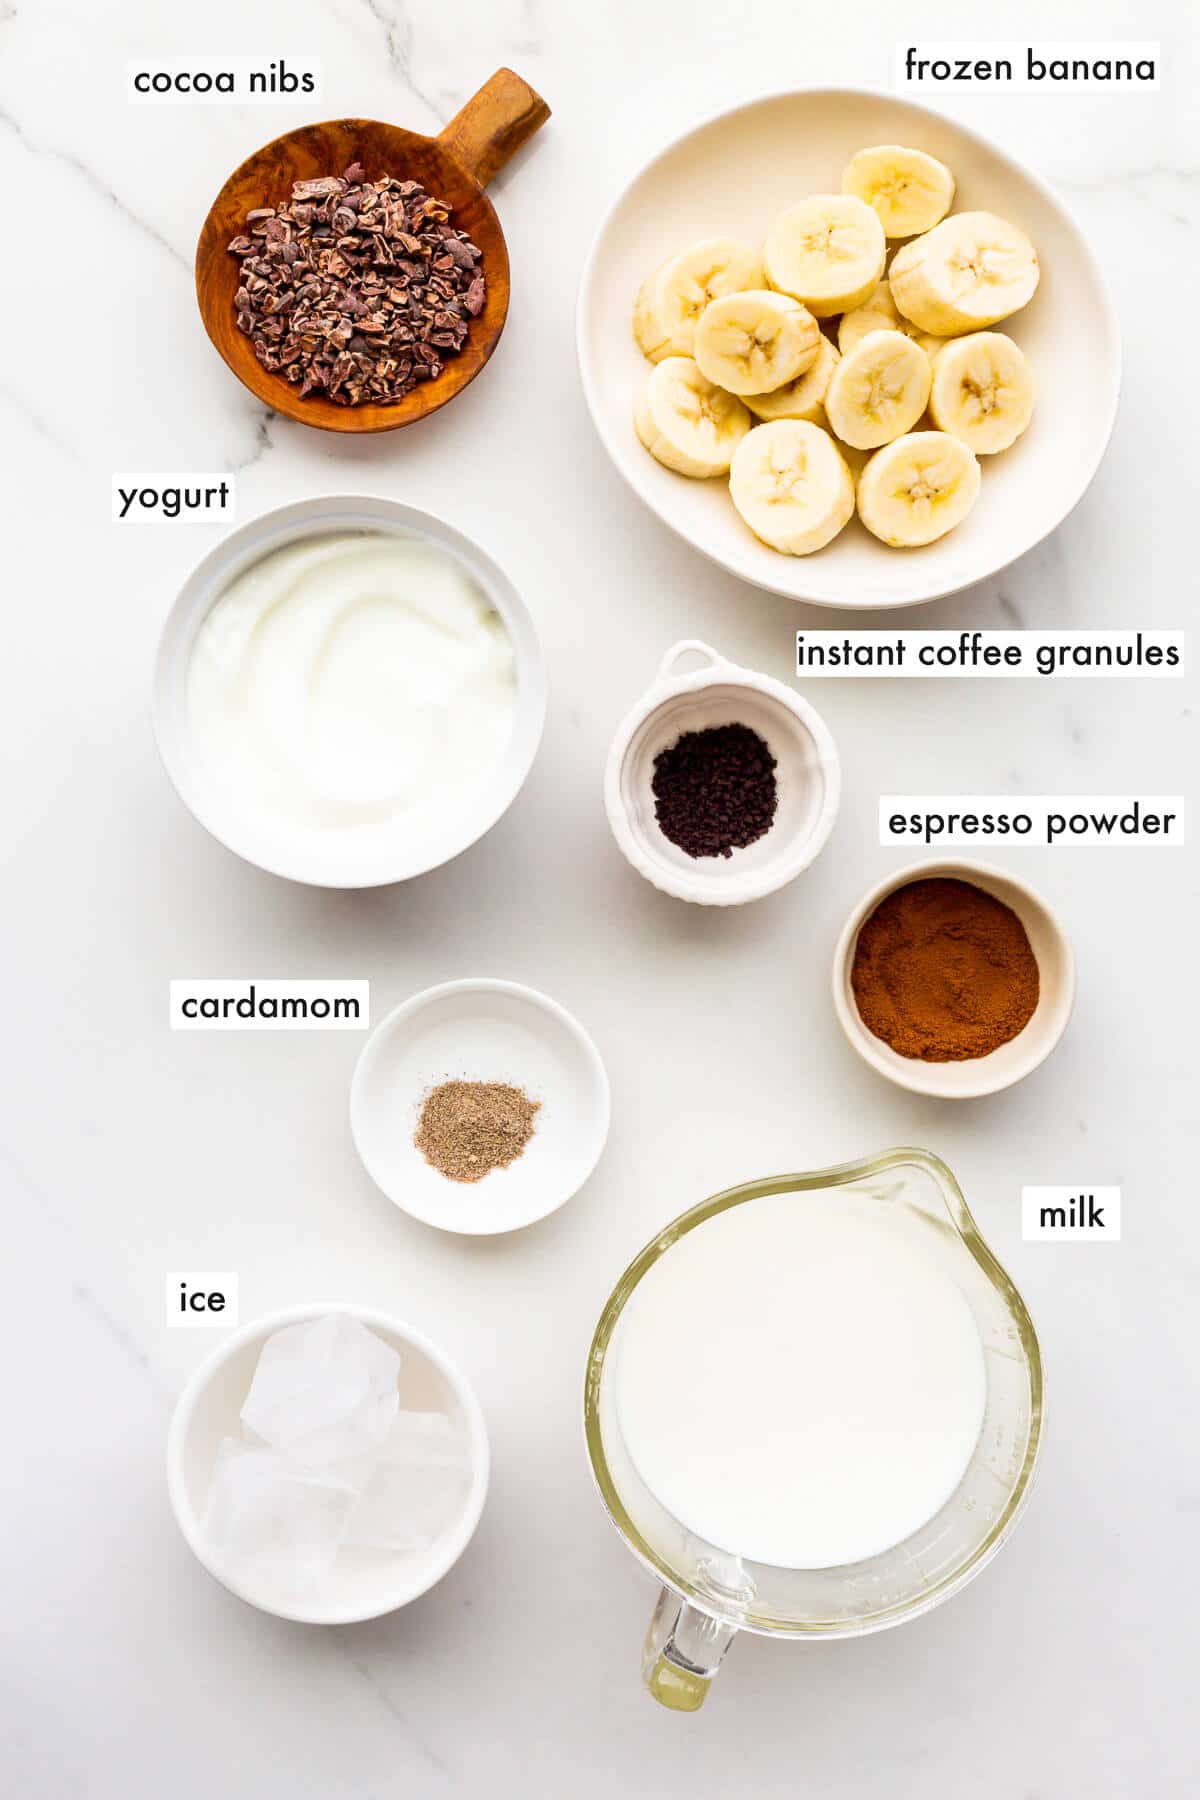 Ingredients to make a banana smoothie with coffee in it, ready to be blended.